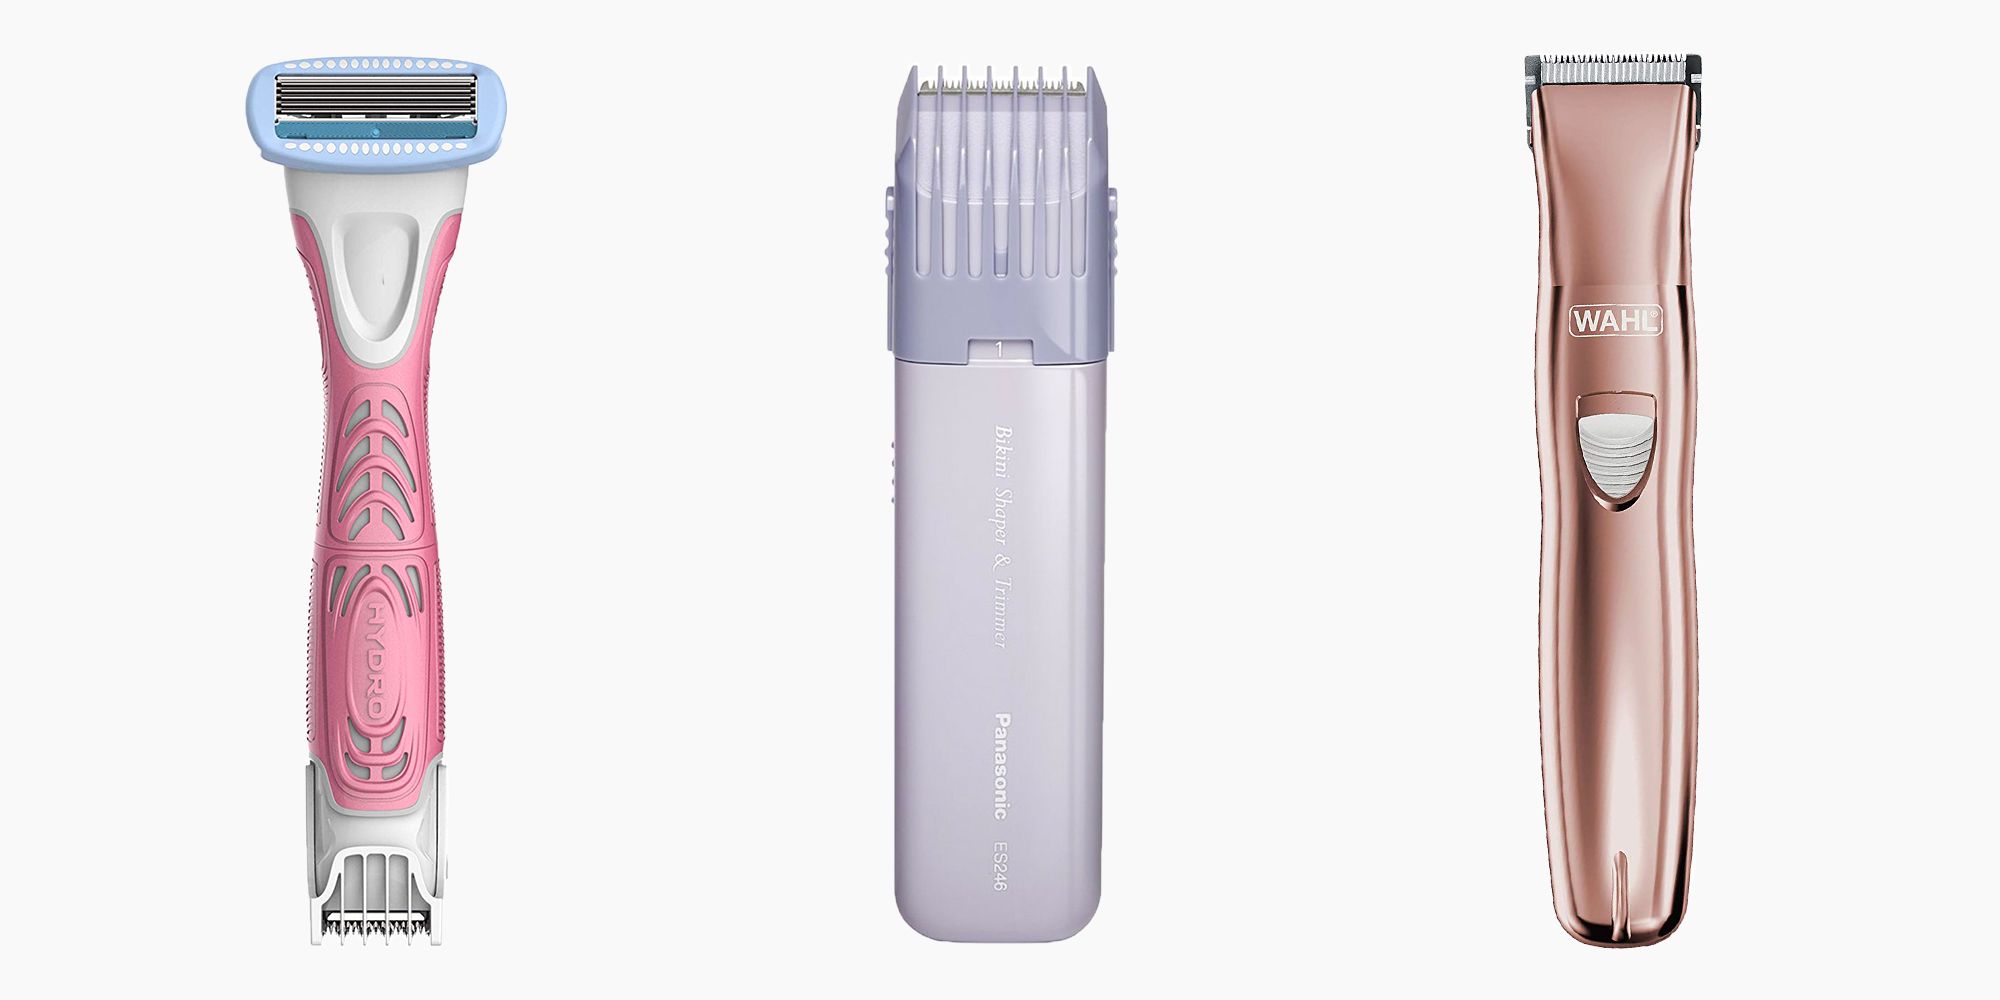 hair trimmer for pubic